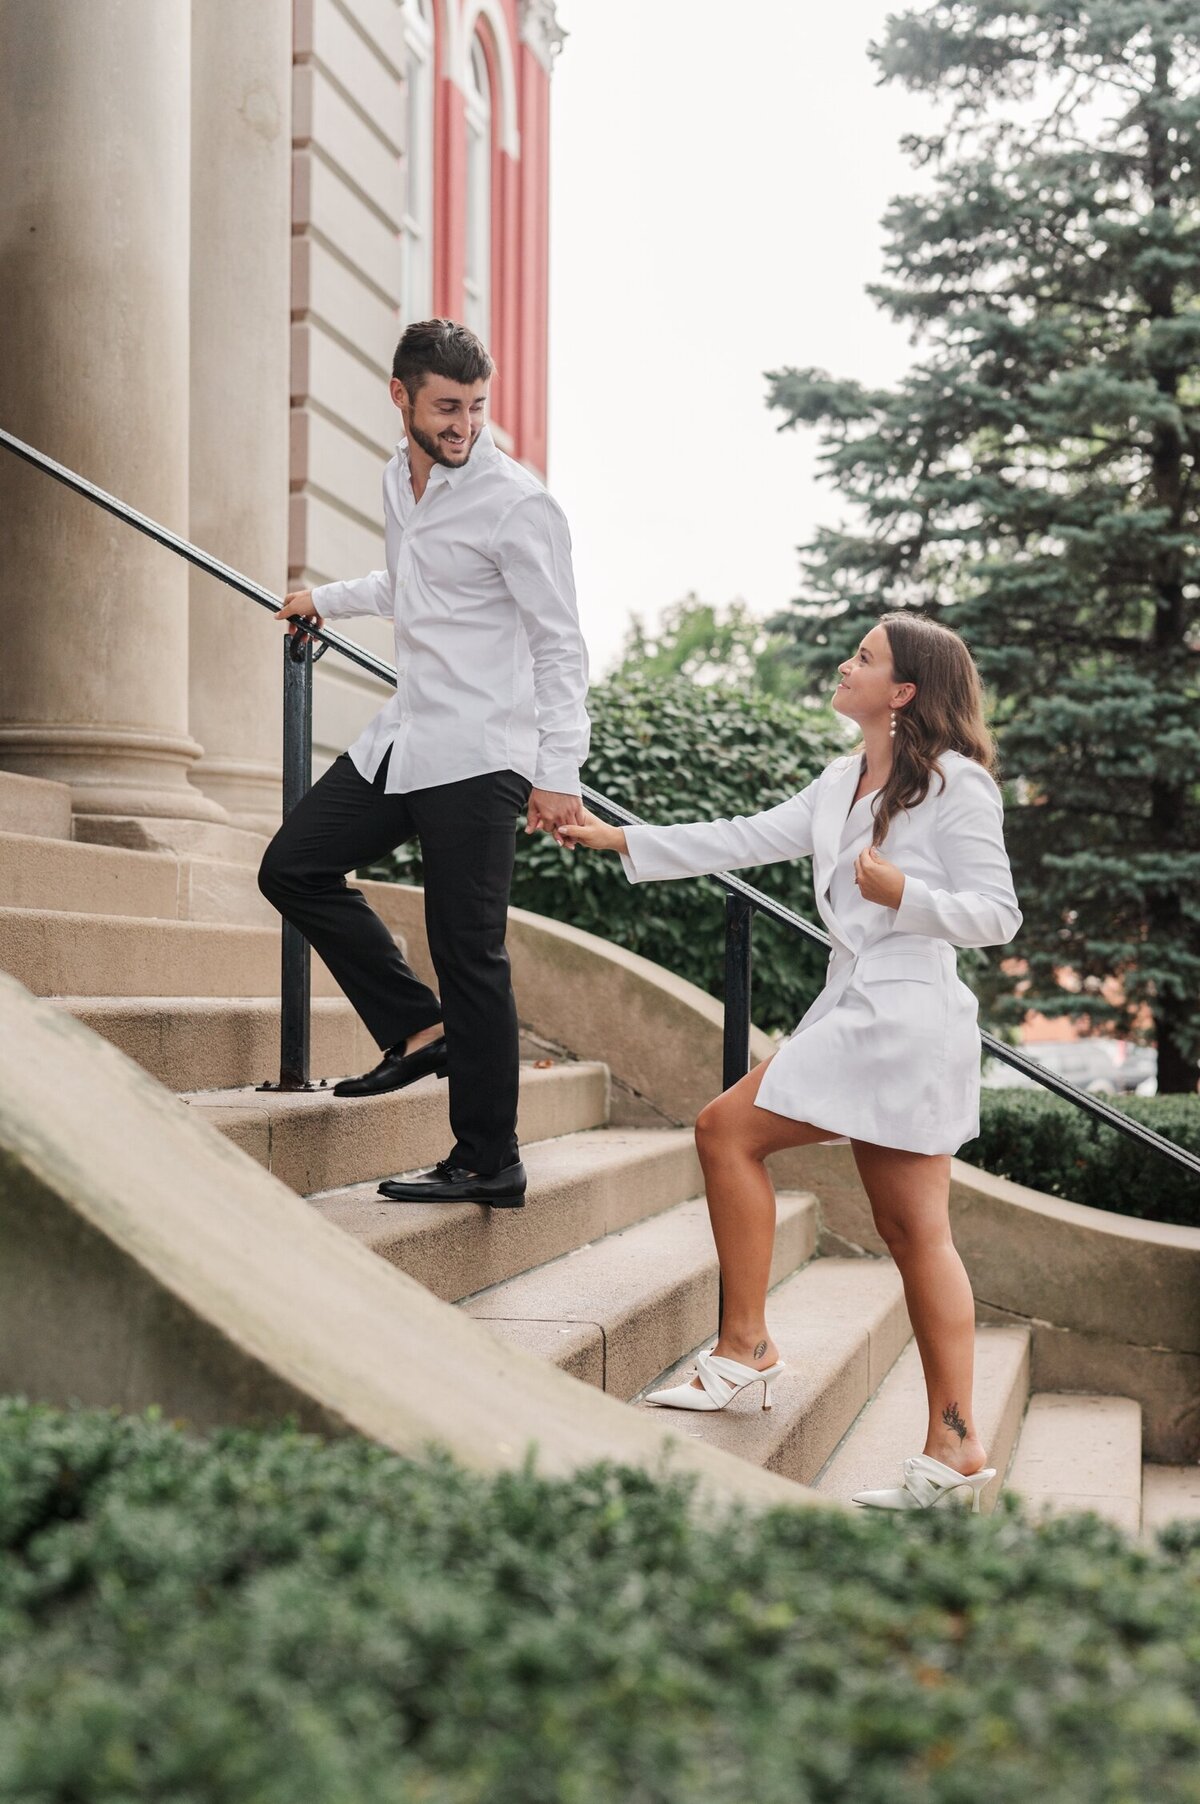 City Hall Elopement Engagement by Courtney Rudicel Chicago Wedding Photographer_0012